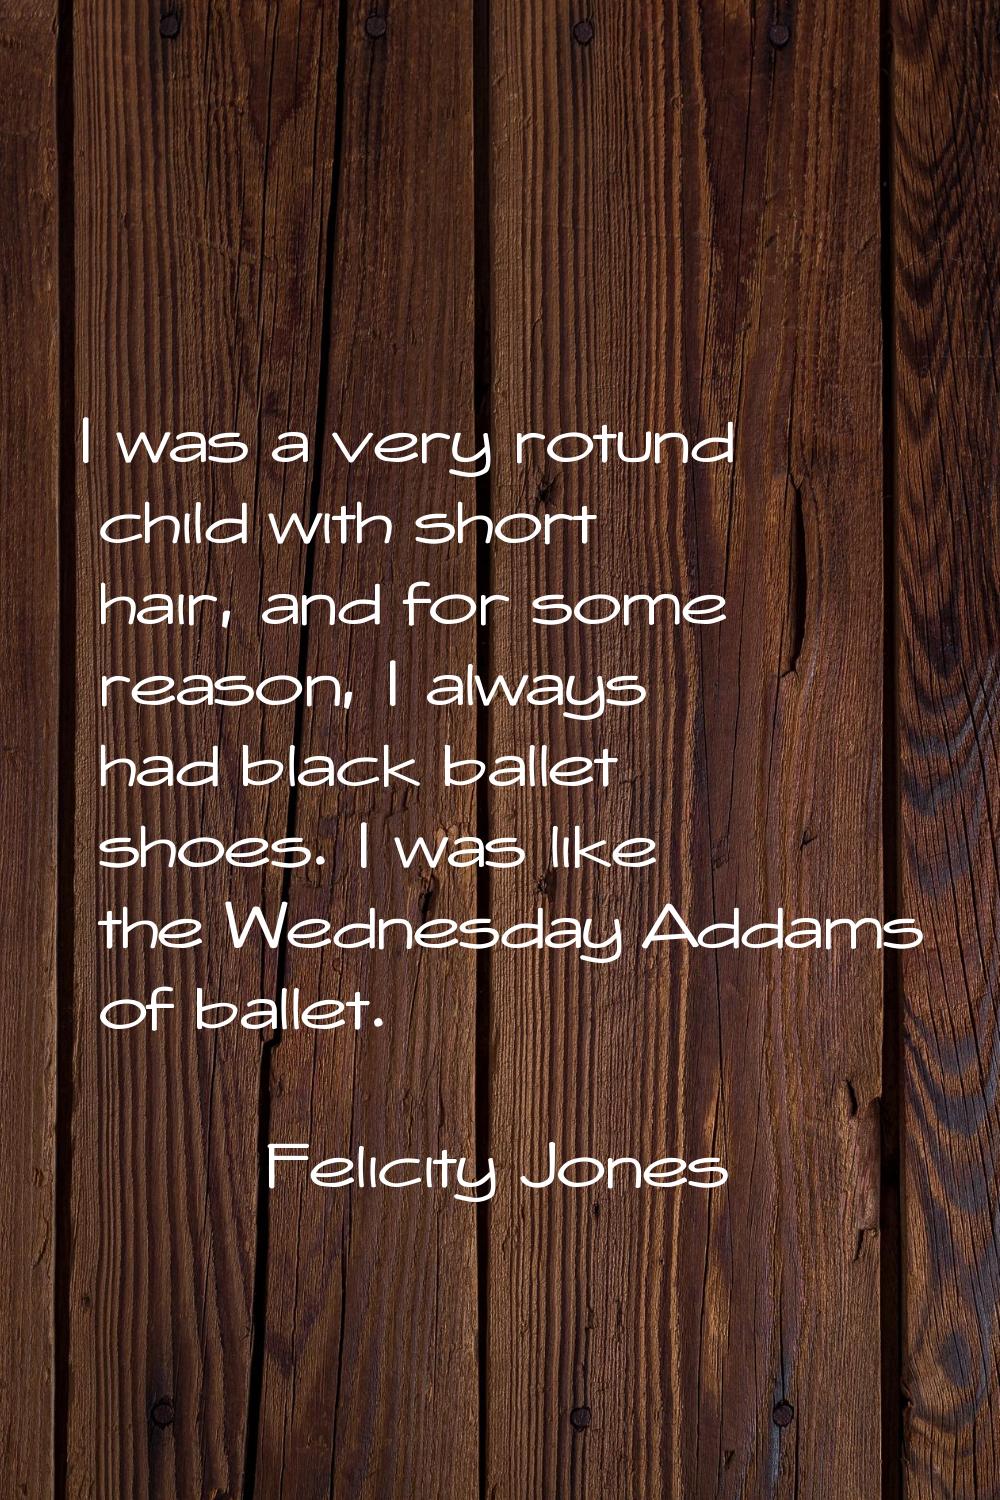 I was a very rotund child with short hair, and for some reason, I always had black ballet shoes. I 